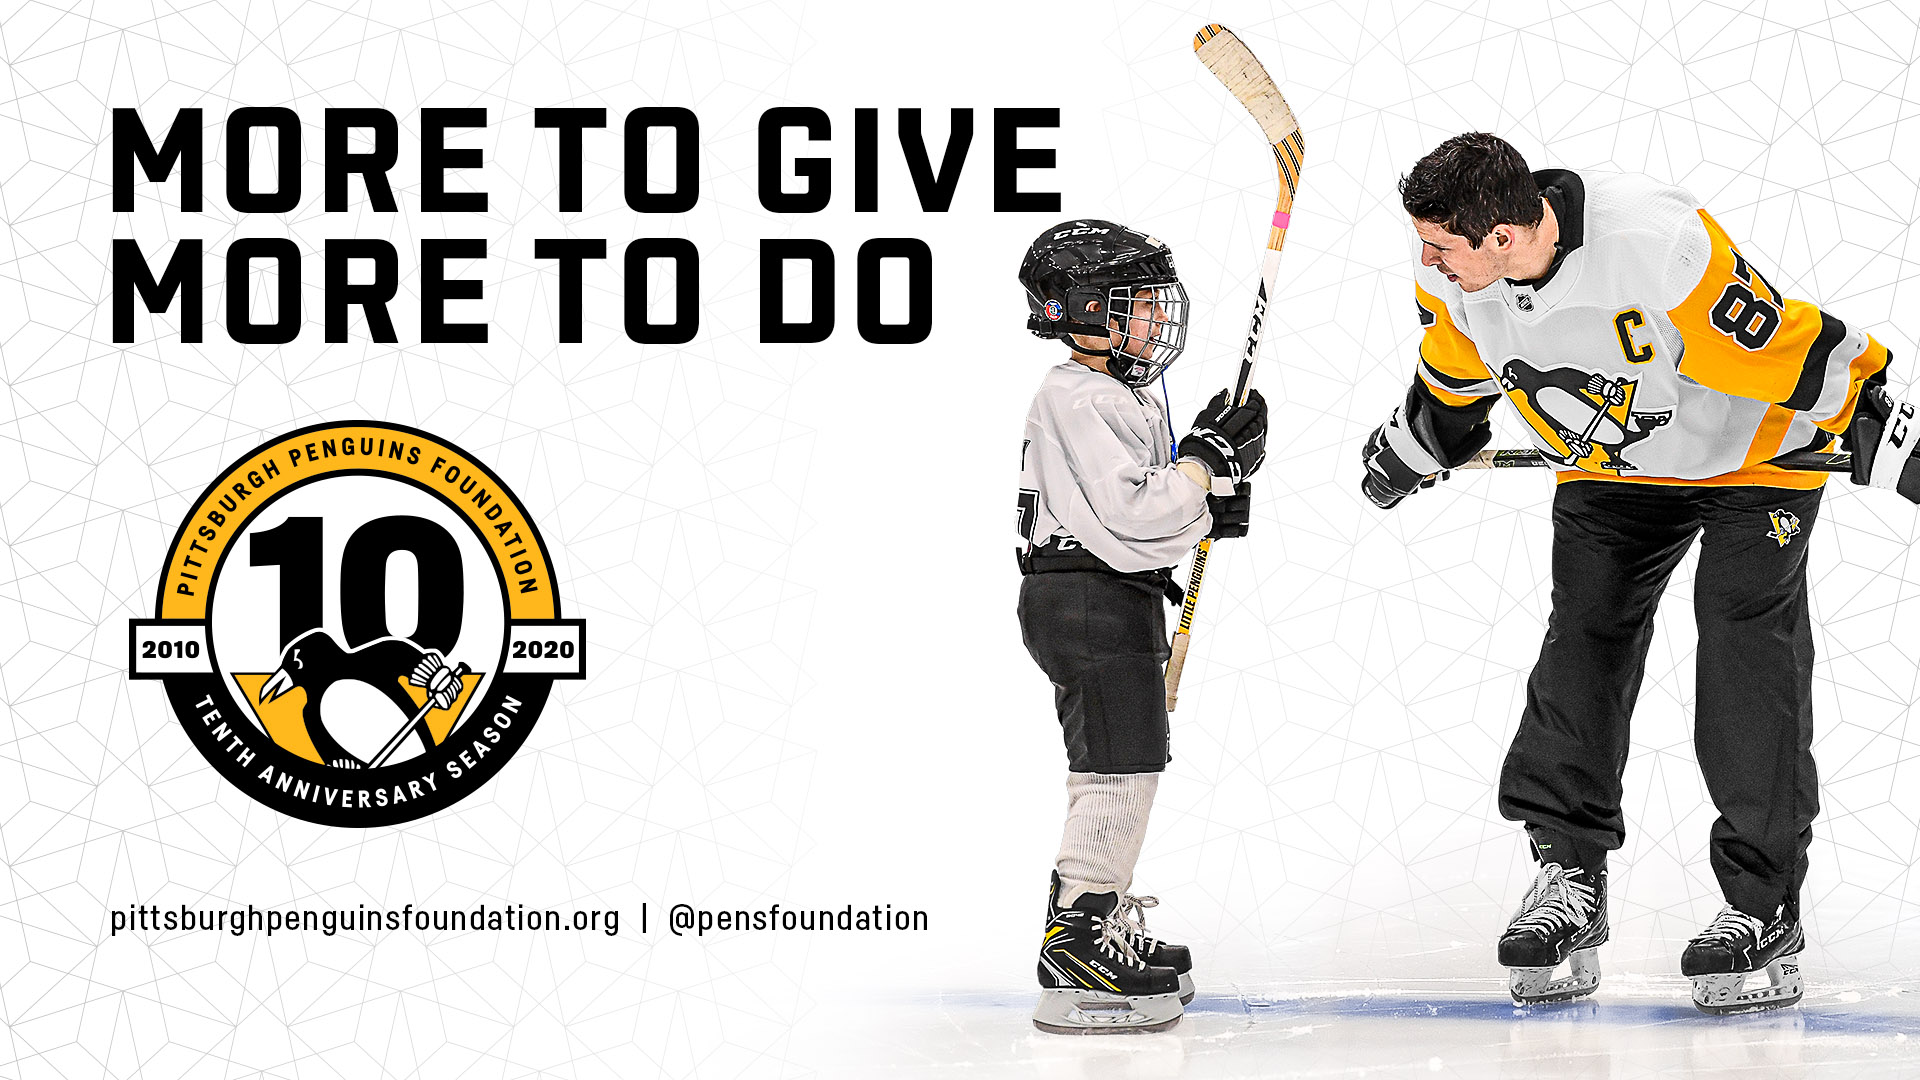 Pittsburgh Penguins Foundation 2010-11 Community Report by